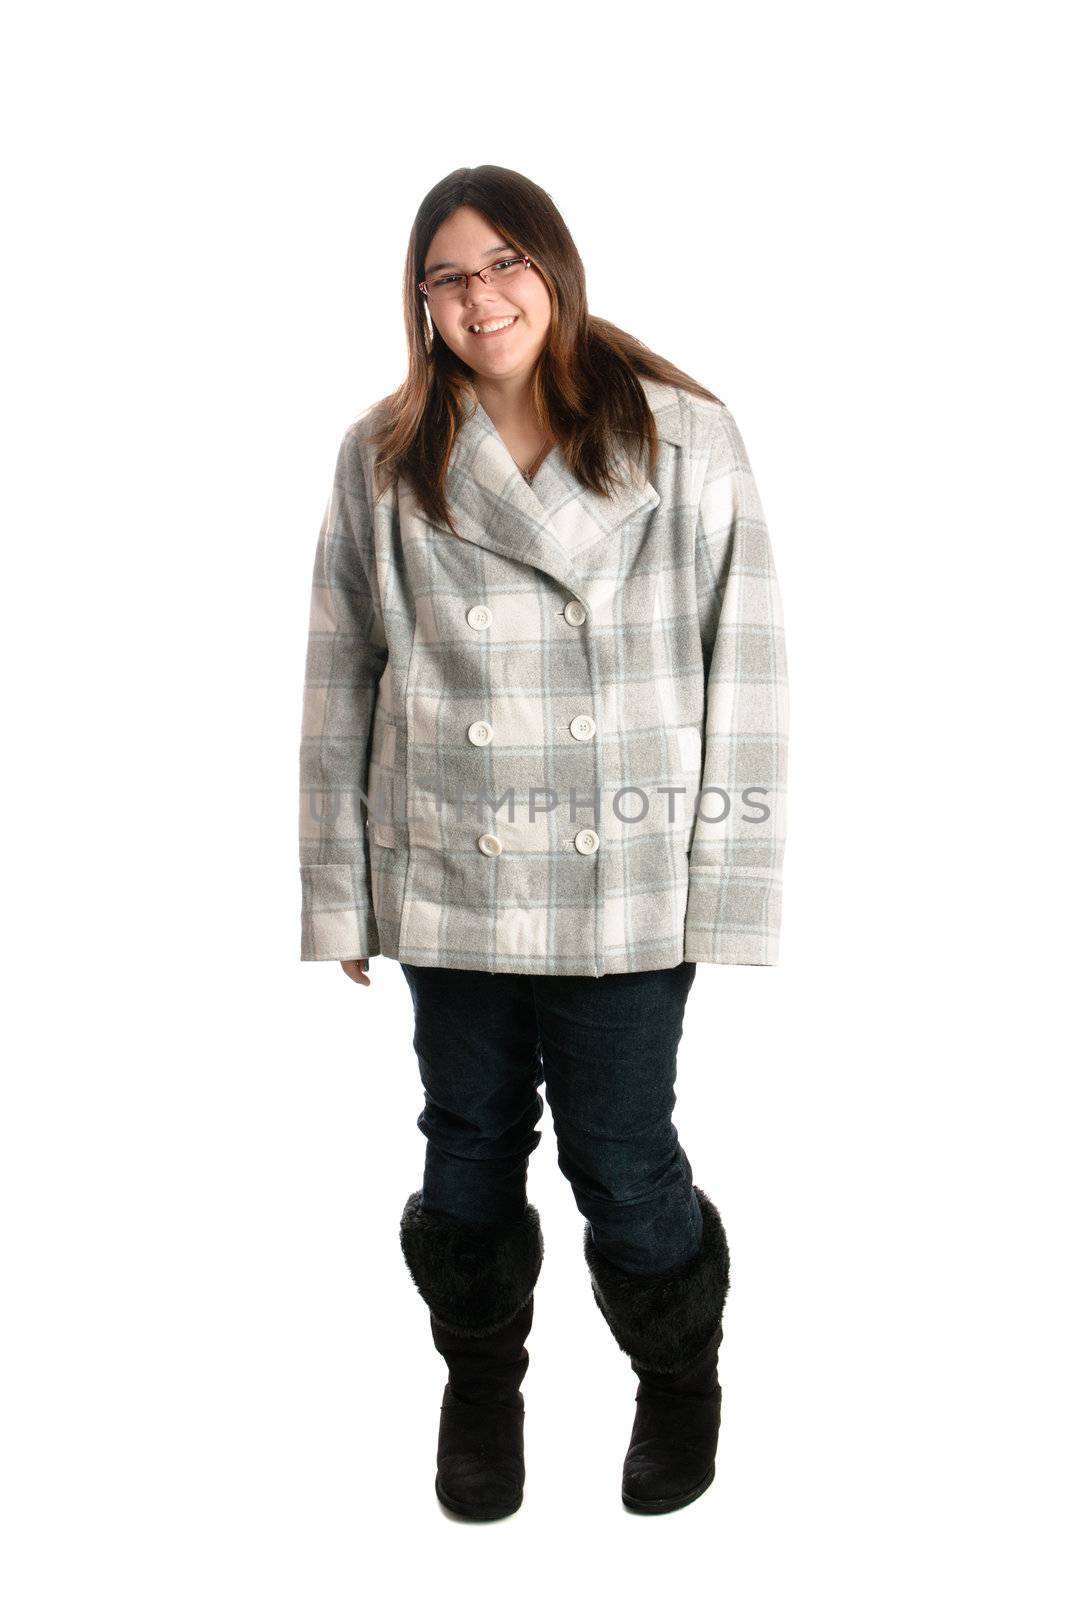 A full body view of a smiling brunette teenage girl is posing while wearing winter clothing, isolated against a white background